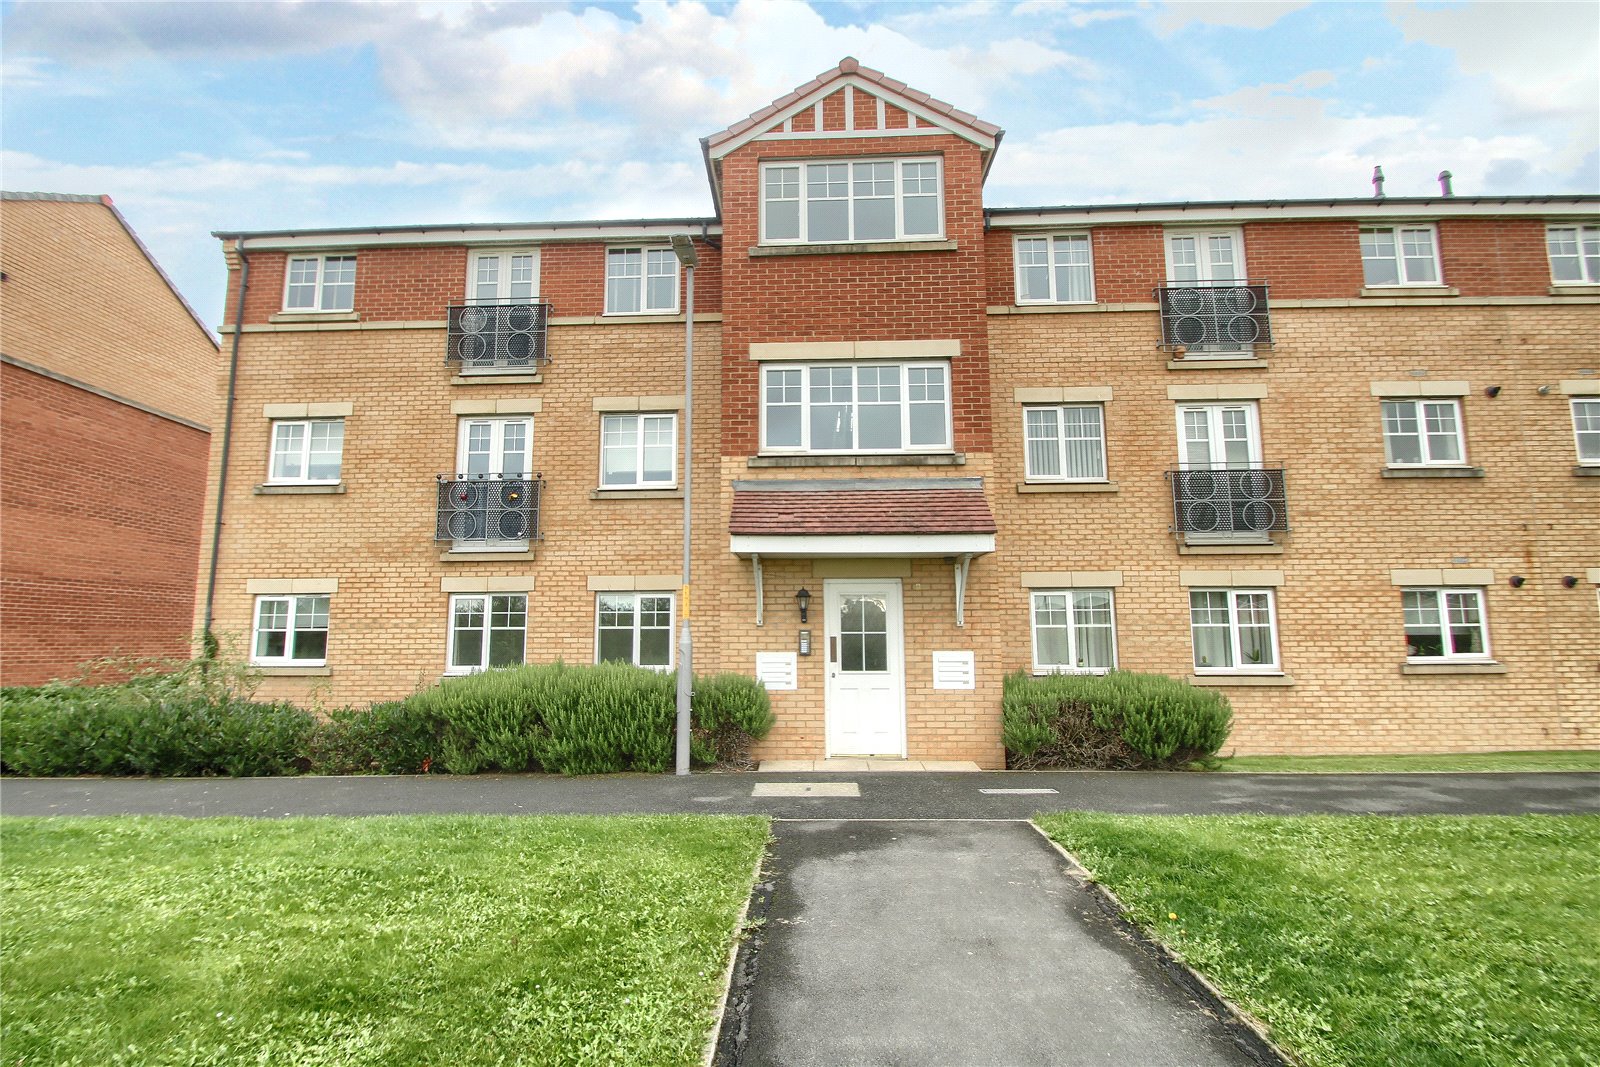 2 bed apartment for sale in Longleat Walk, Ingleby Barwick  - Property Image 1